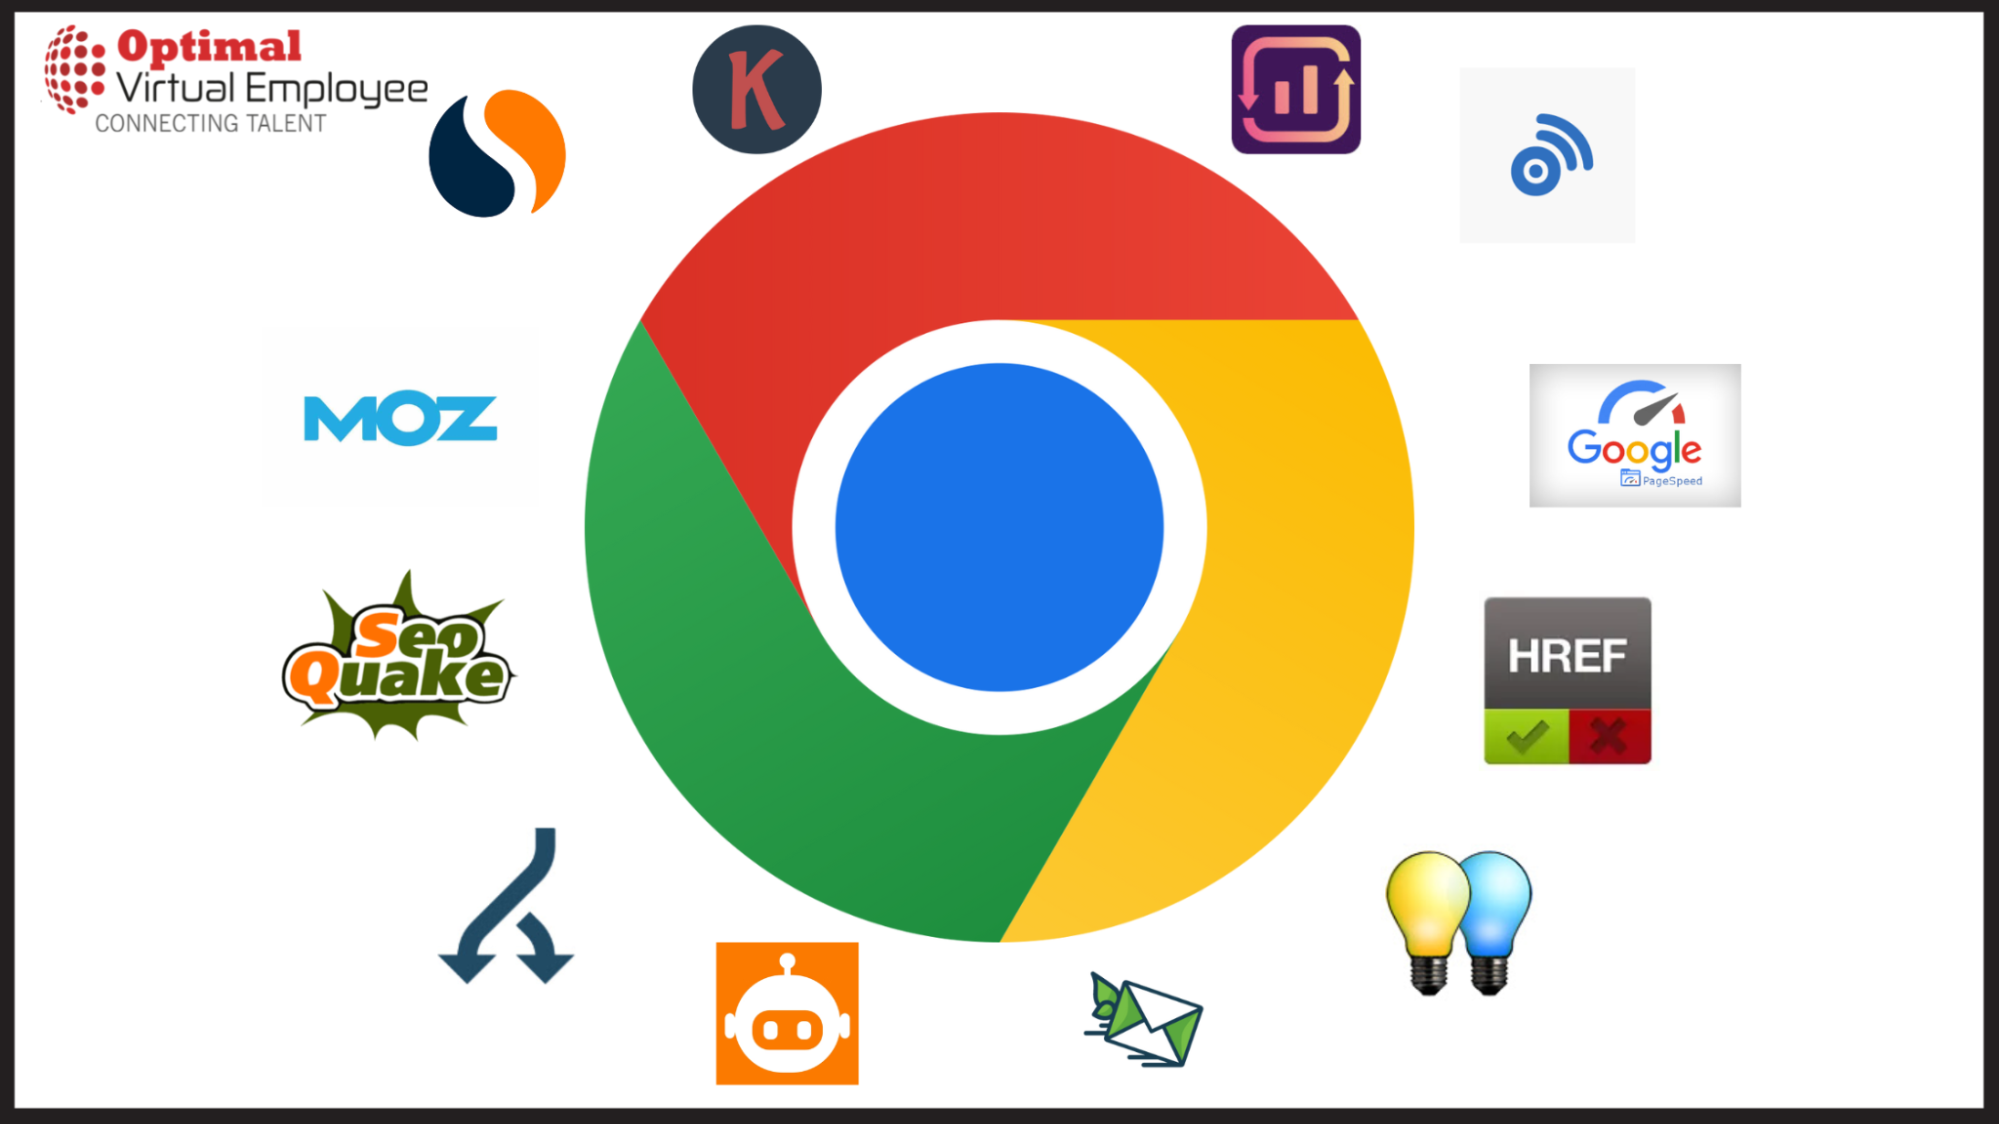 Chrome Extensions for SEO